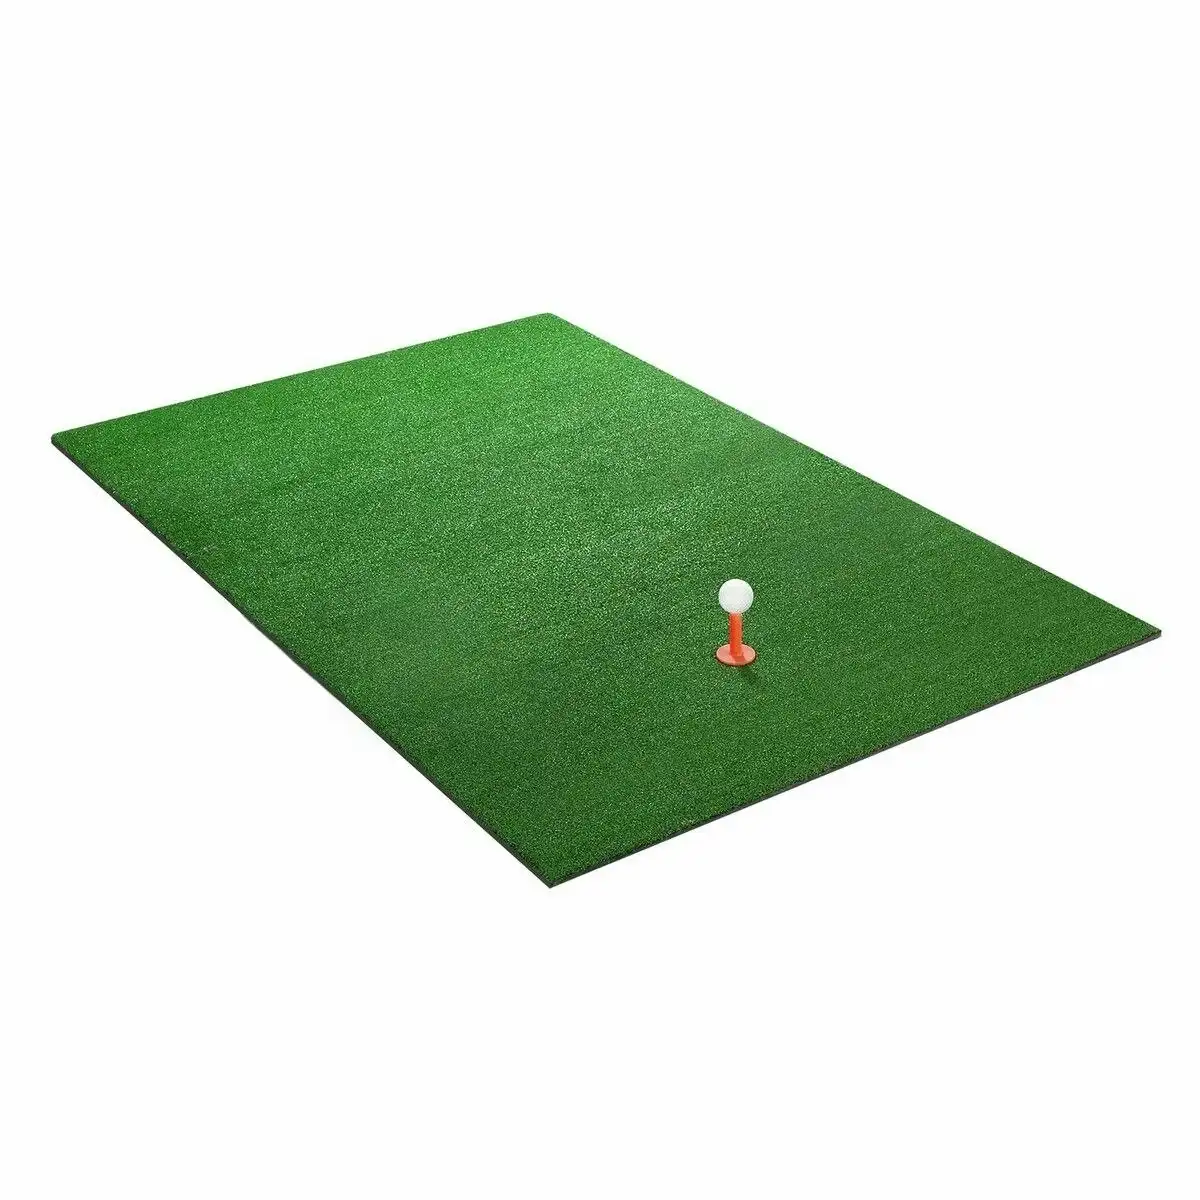 Ausway Golf Putter Mat Practice Hitting Training Putting Indoor Outdoor Chipping Driving Artificial Turf with Rubber Tee Golf Ball Green